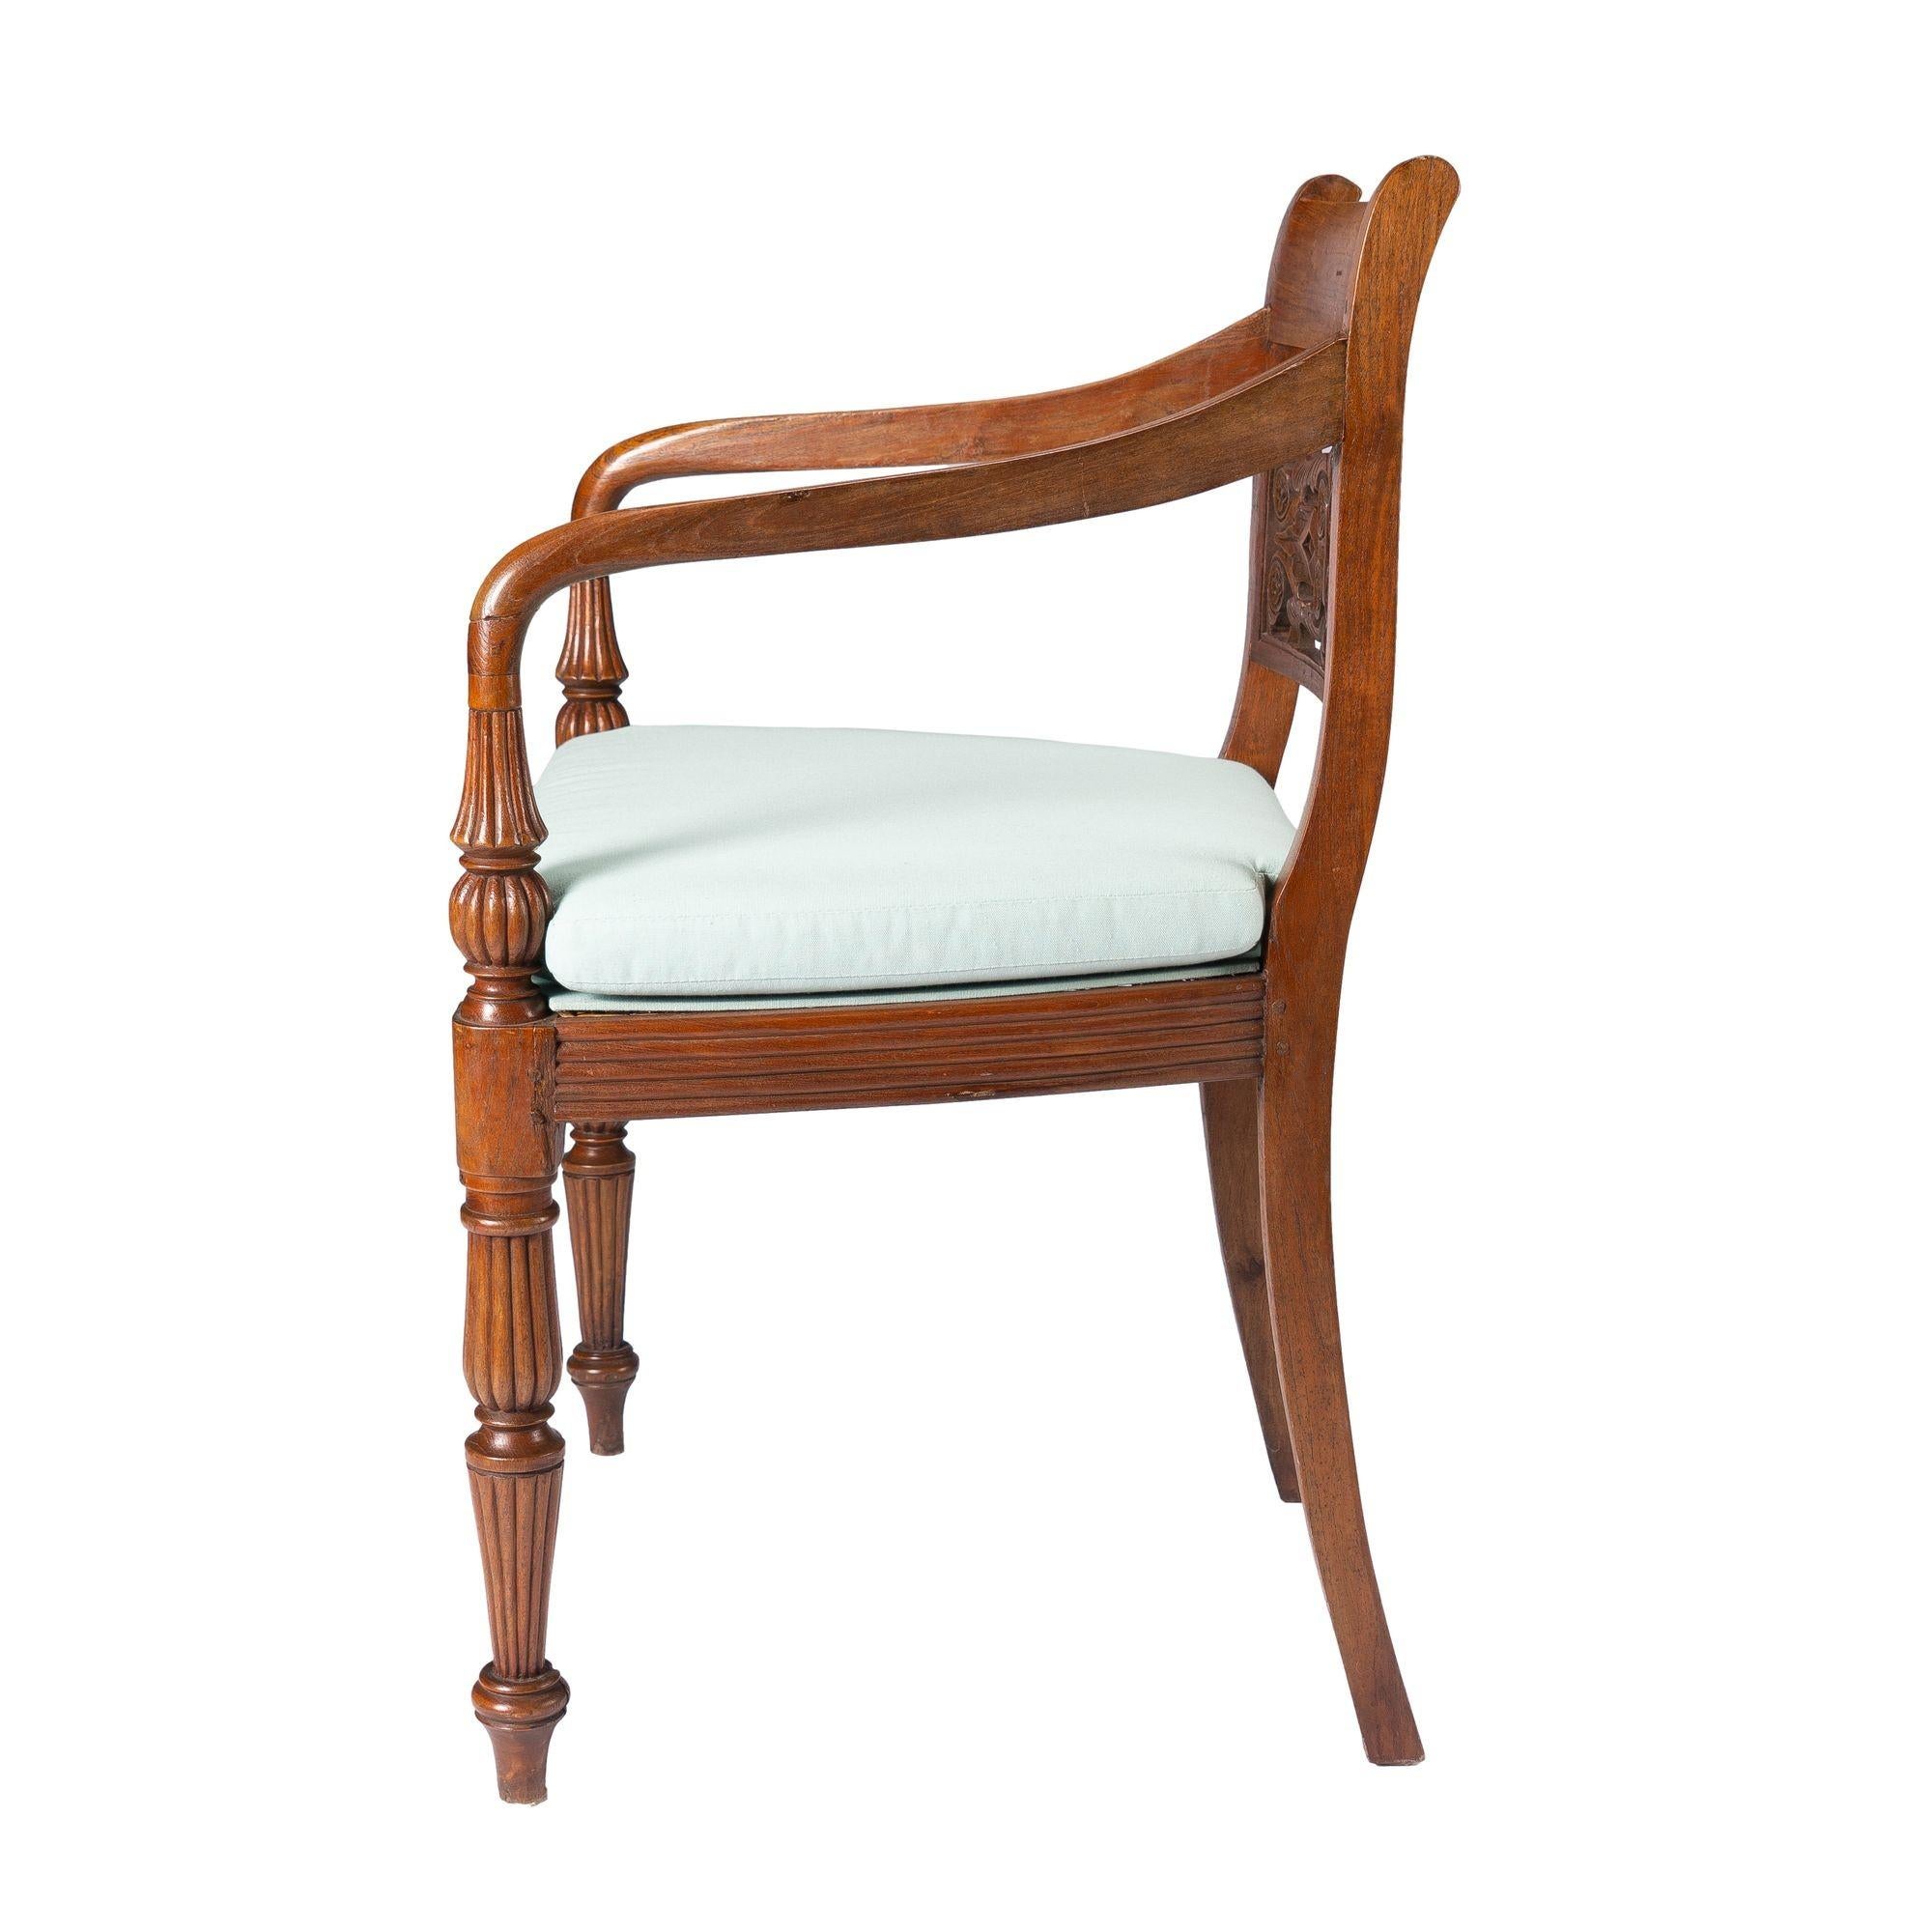 Anglo-Indian Sheraton teak arm chair with caned seat fitted with a boxed seat cushion and upholstered seat platform. This British Raj-era chair is defined by turned and reeded legs, arm posts and front seat rail. The back rail is hand carved and